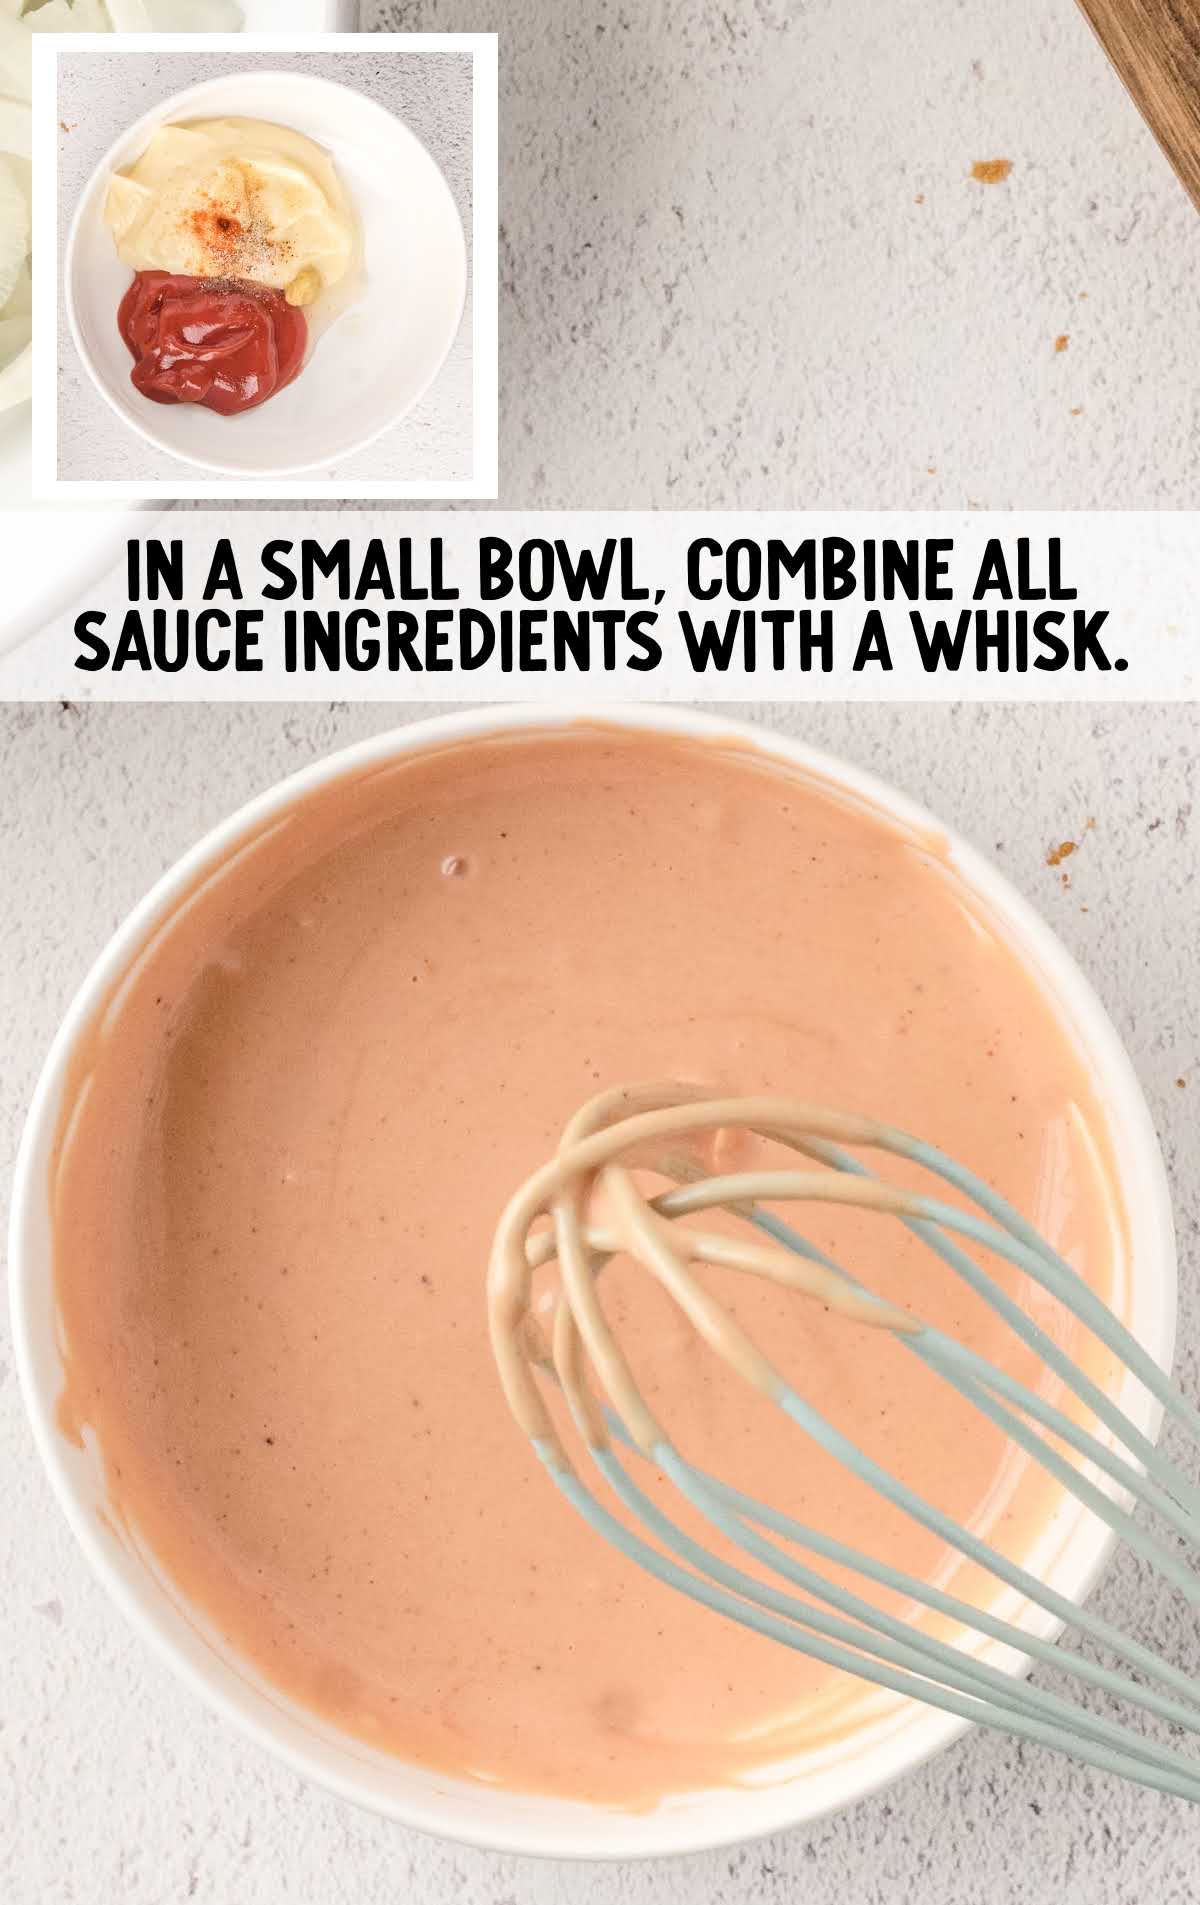 sauce ingredients being whisked together in a bowl